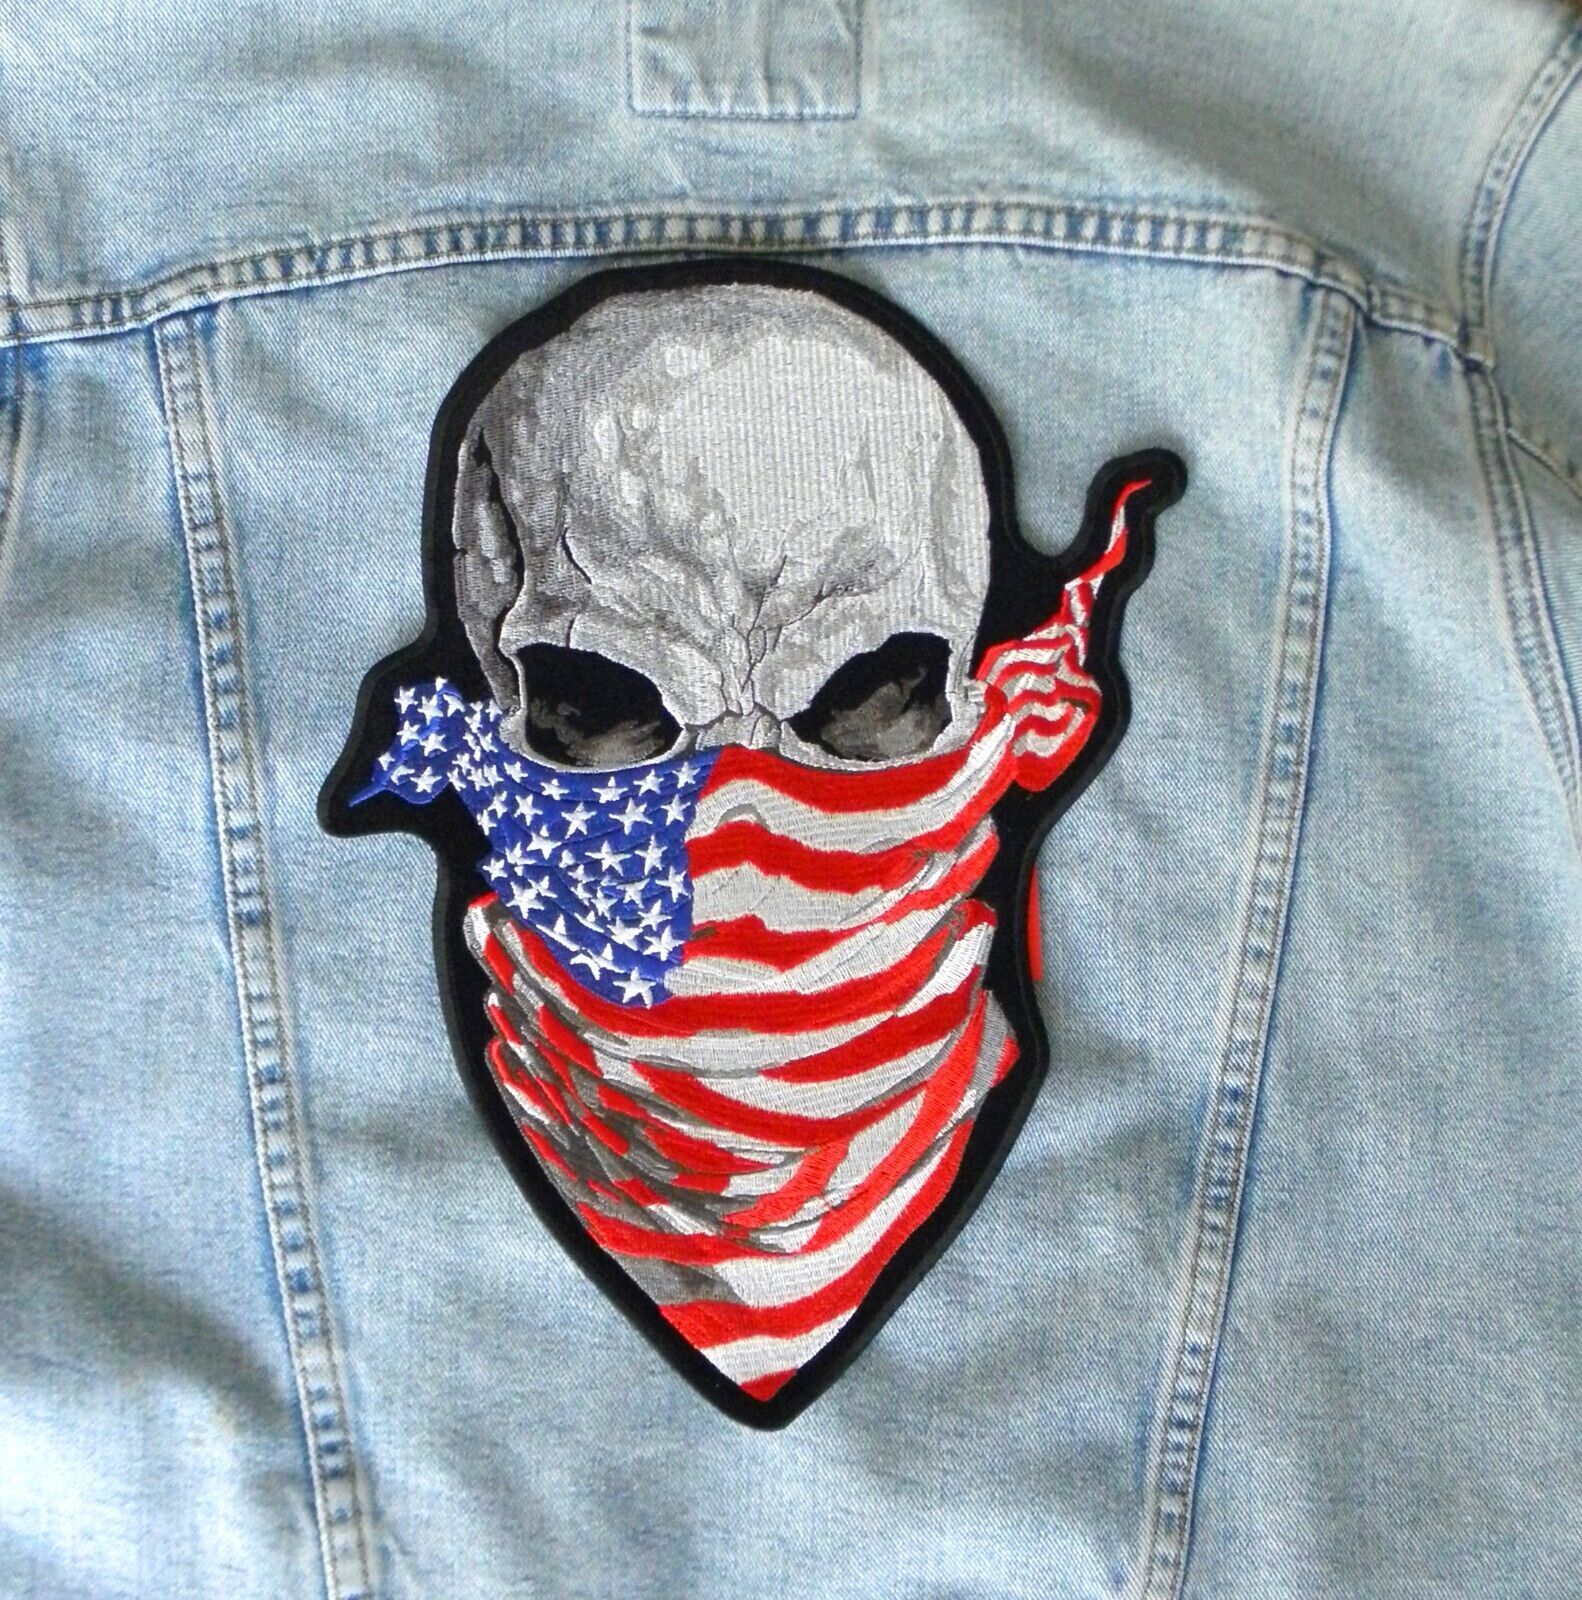 America Rising USA Flag Skull Motorcycle Biker Embroidered Jacket Patch 9 x 12 \